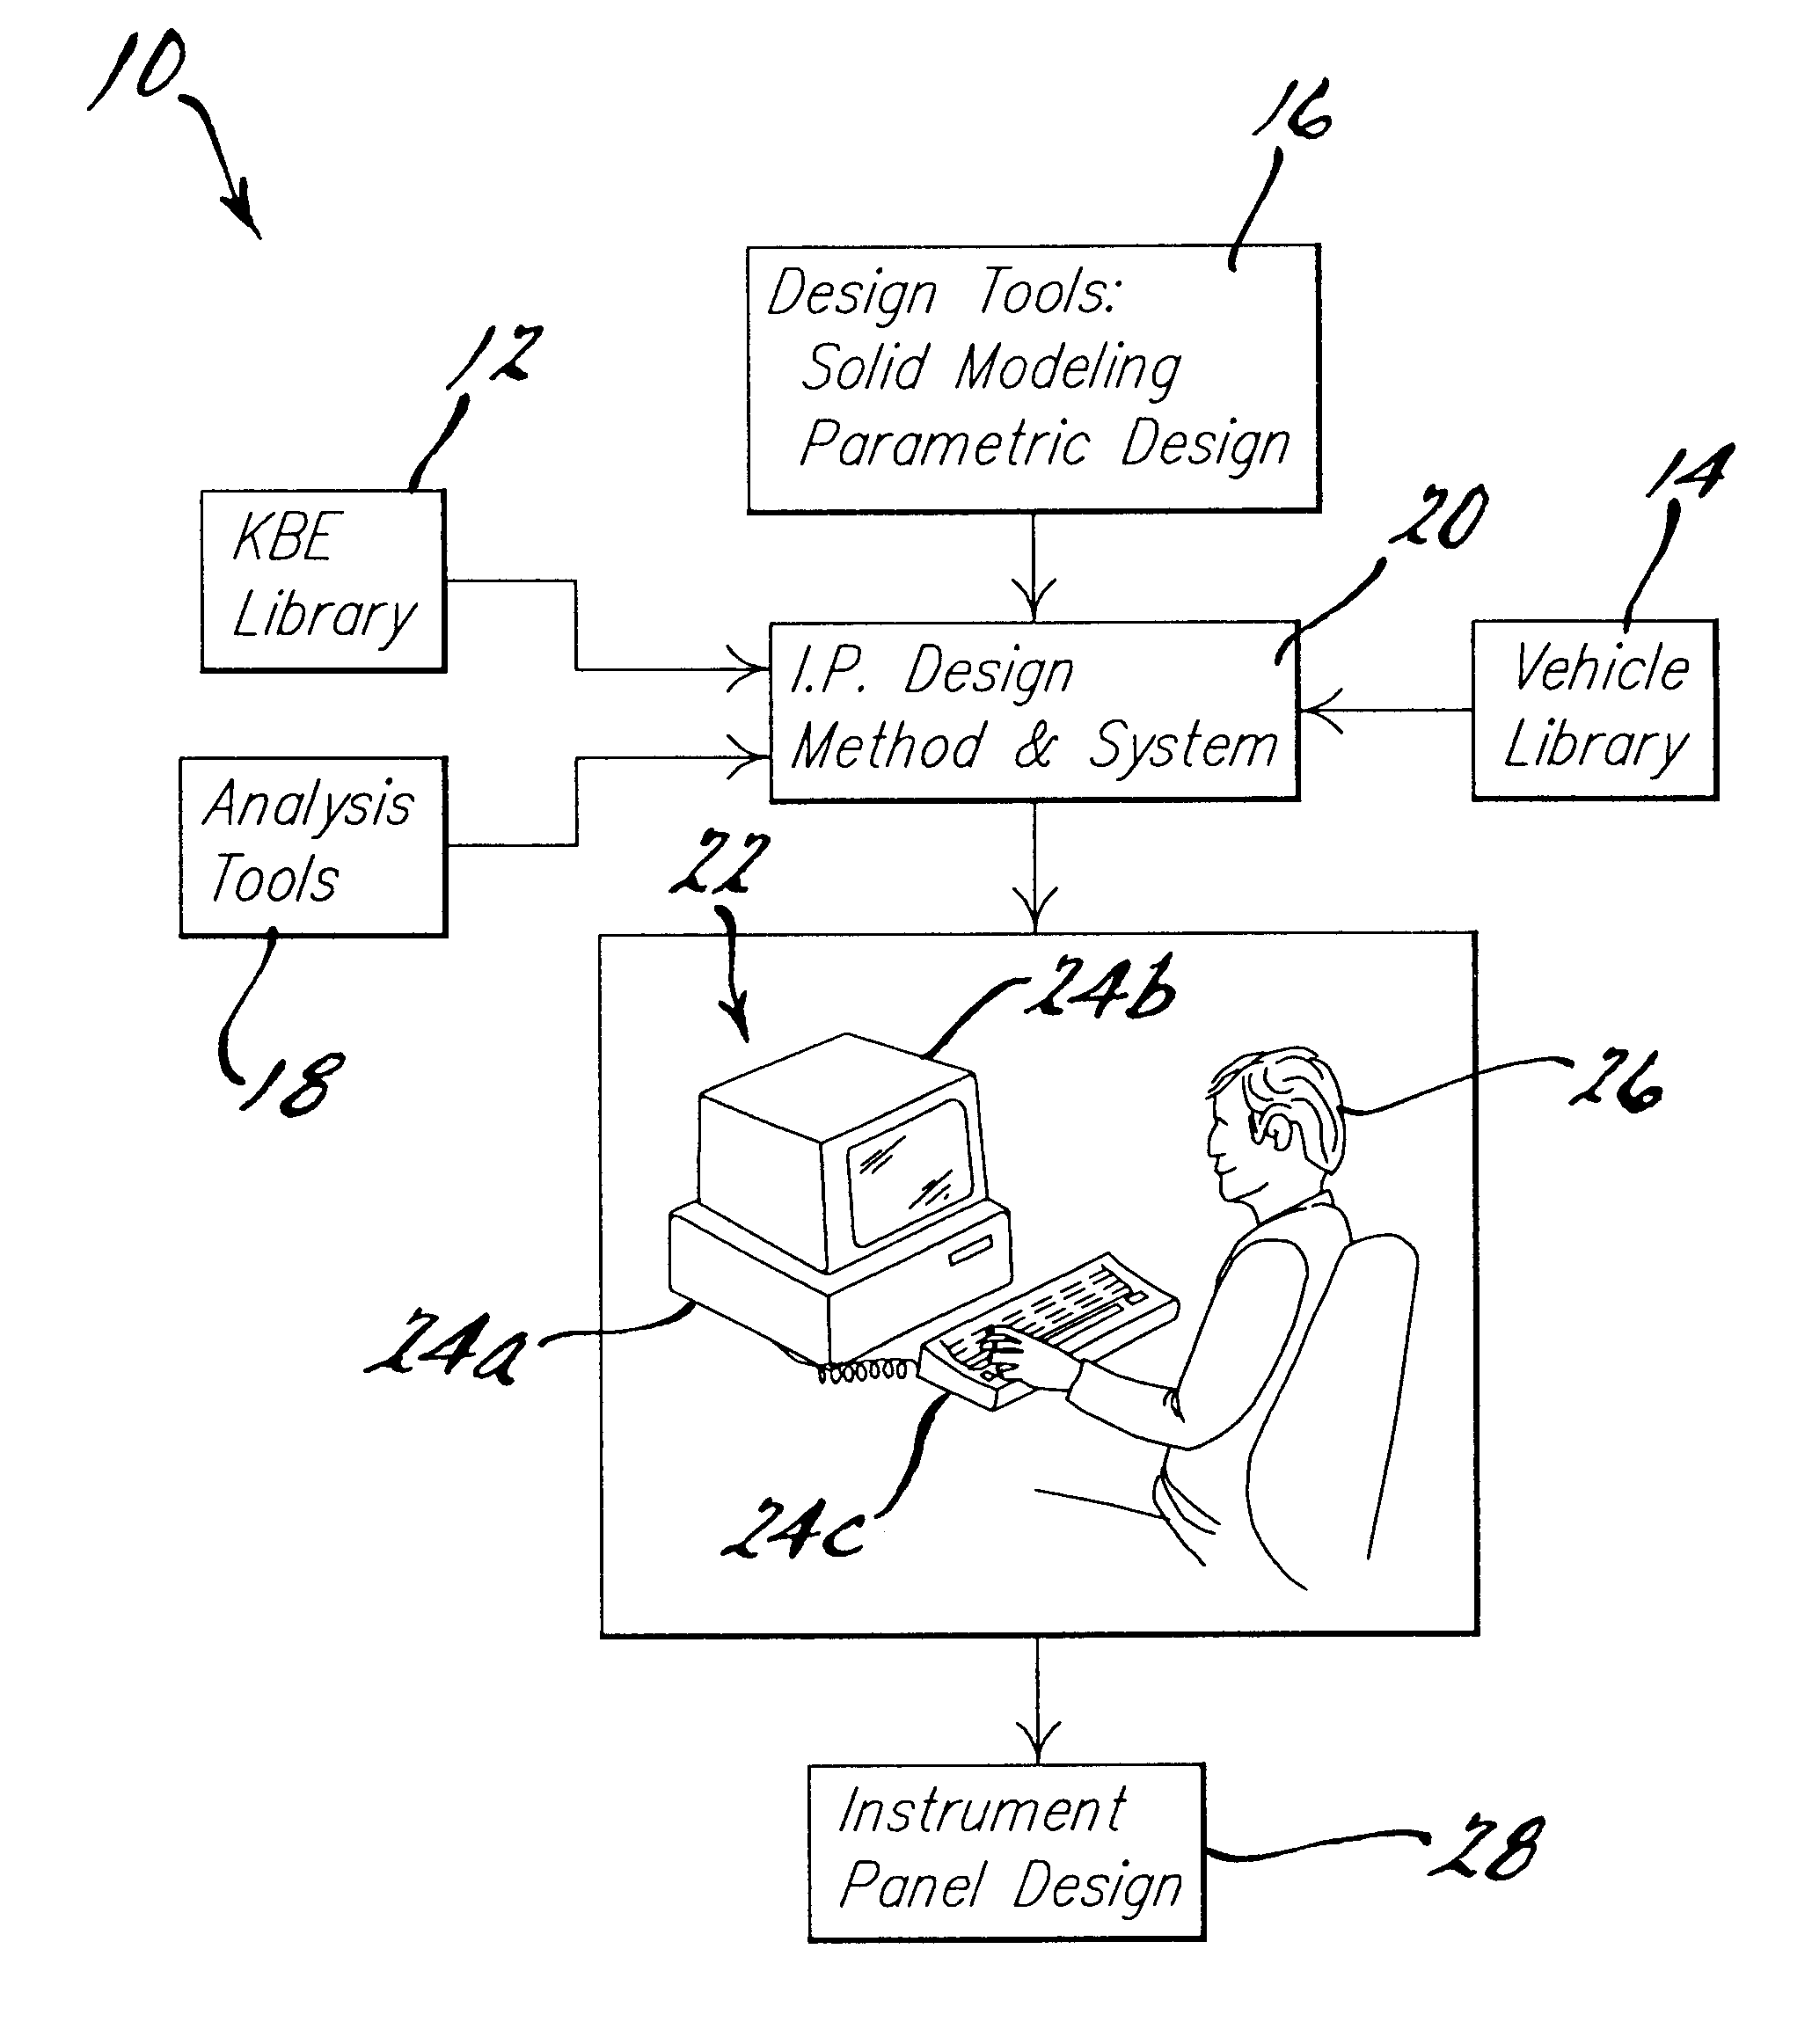 Method of knowledge-based engineering design of an instrument panel